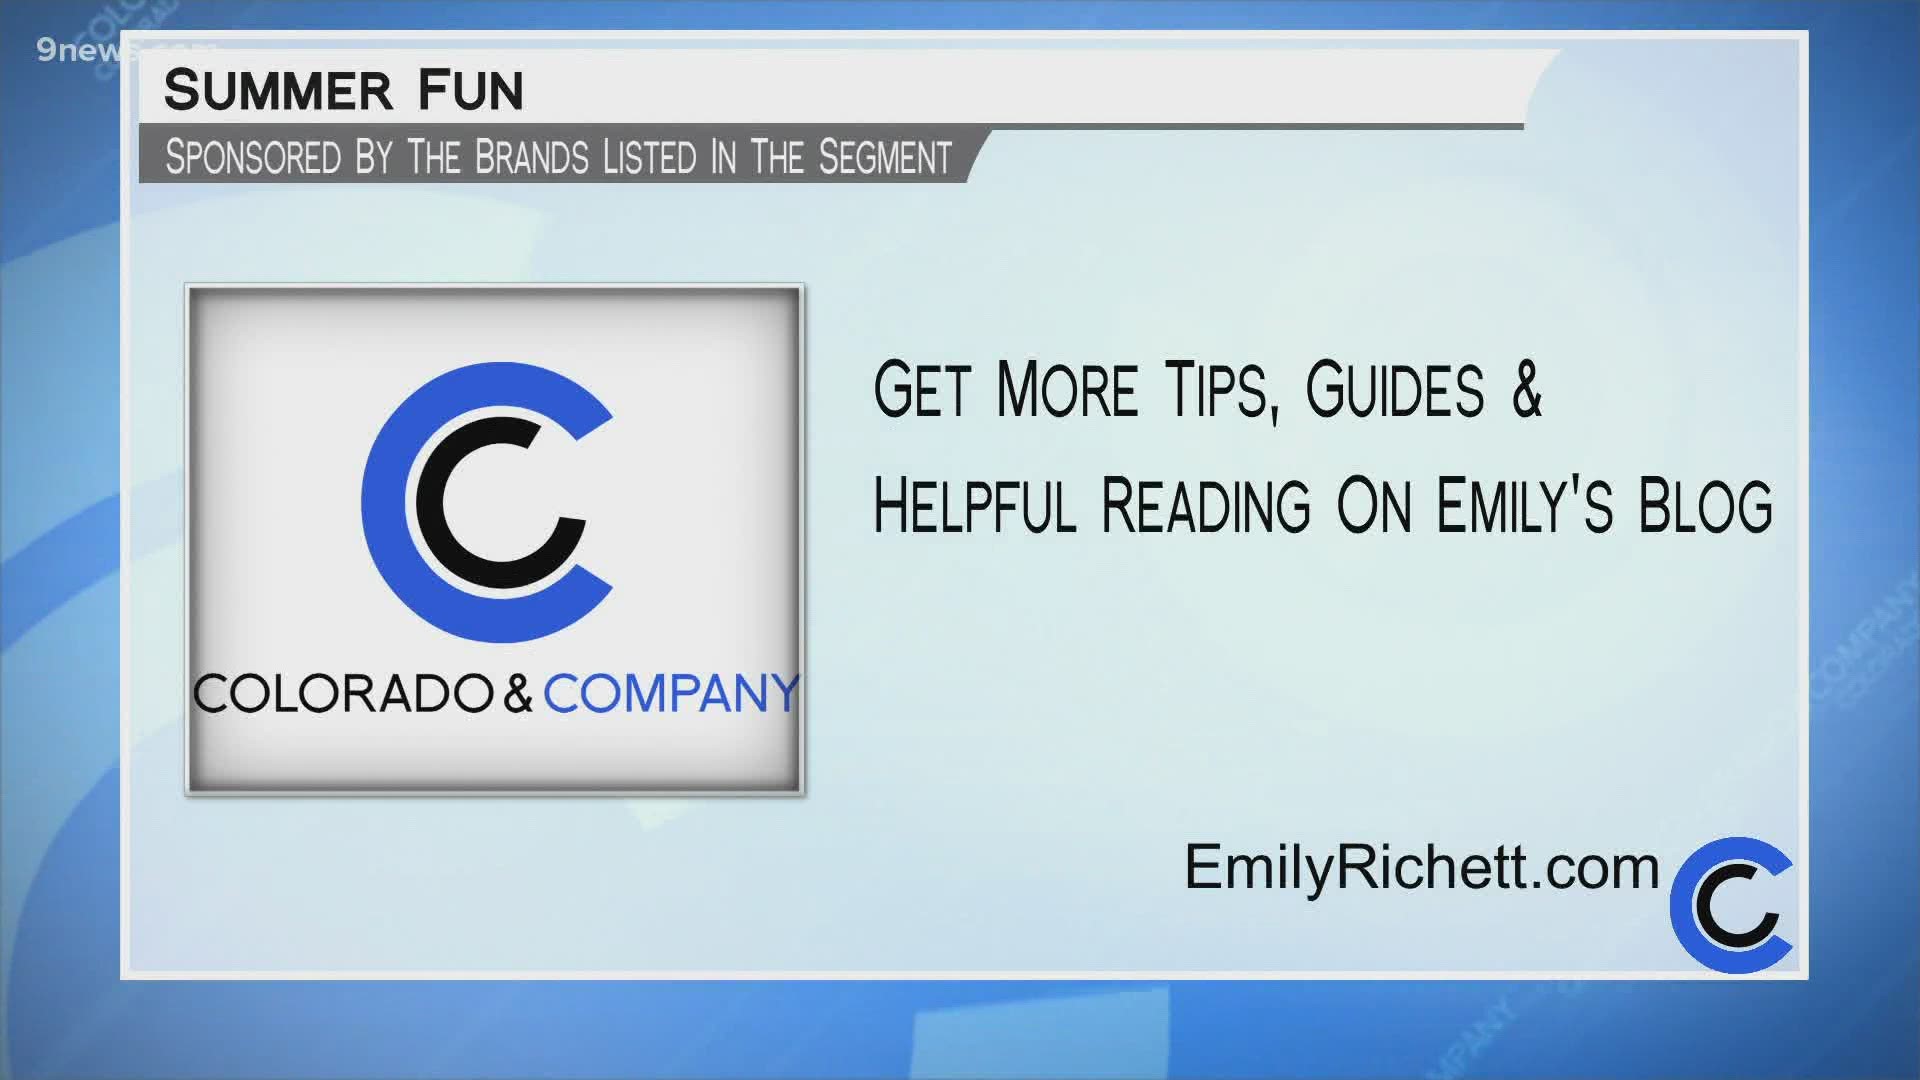 Find more of Emily's summer tips, guides and helpful readings at EmilyRichett.com.